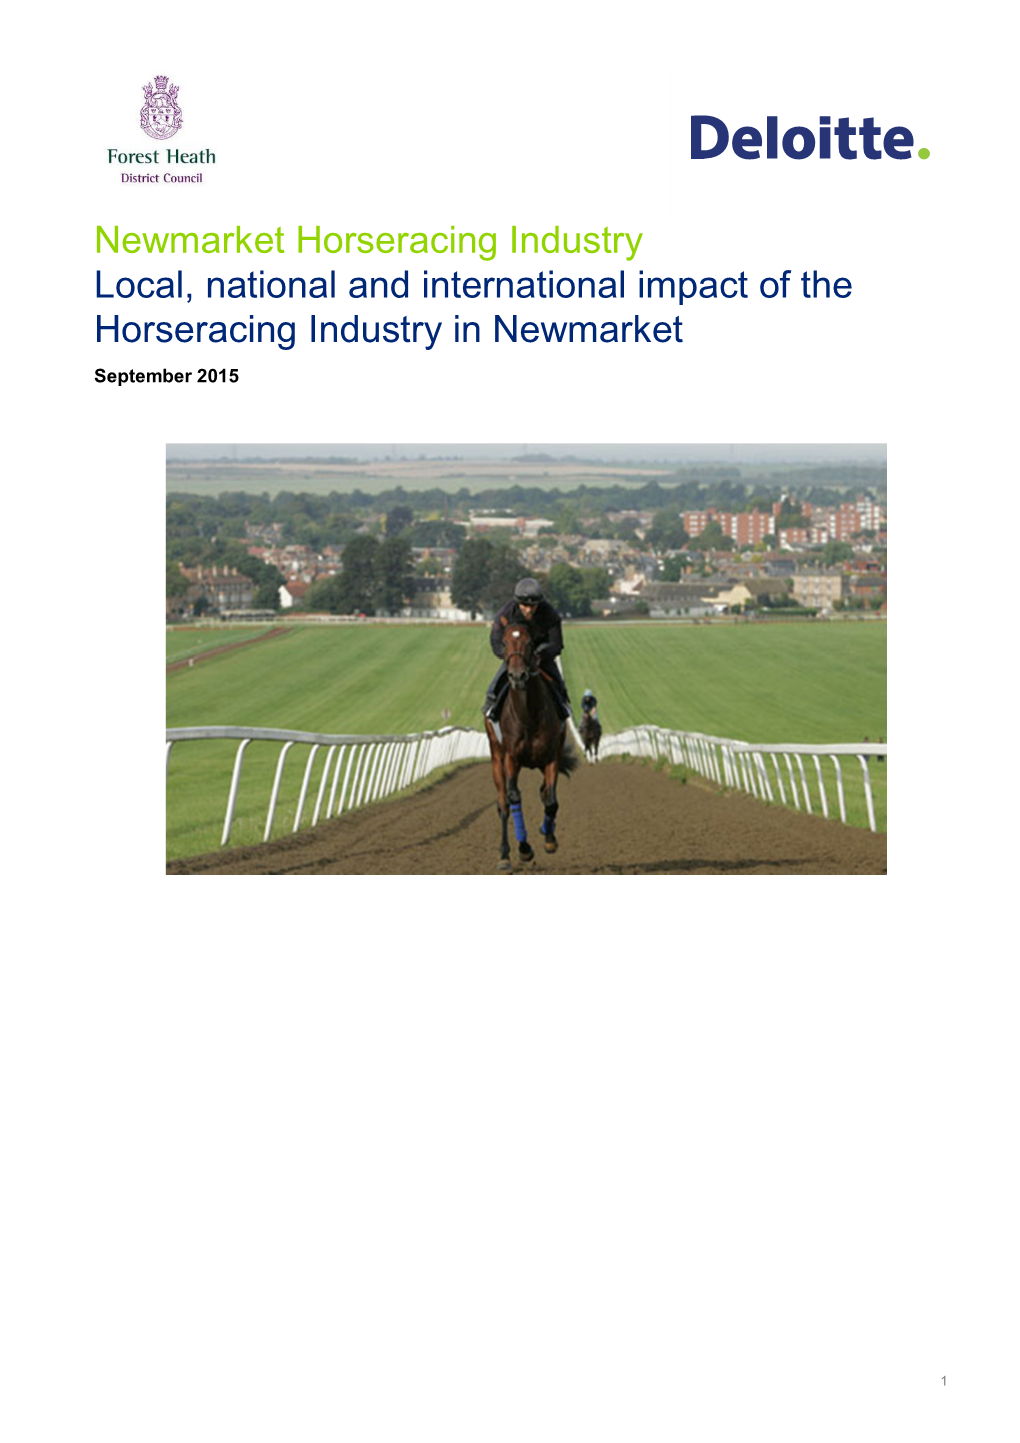 Newmarket Horseracing Industry Local, National and International Impact of the Horseracing Industry in Newmarket